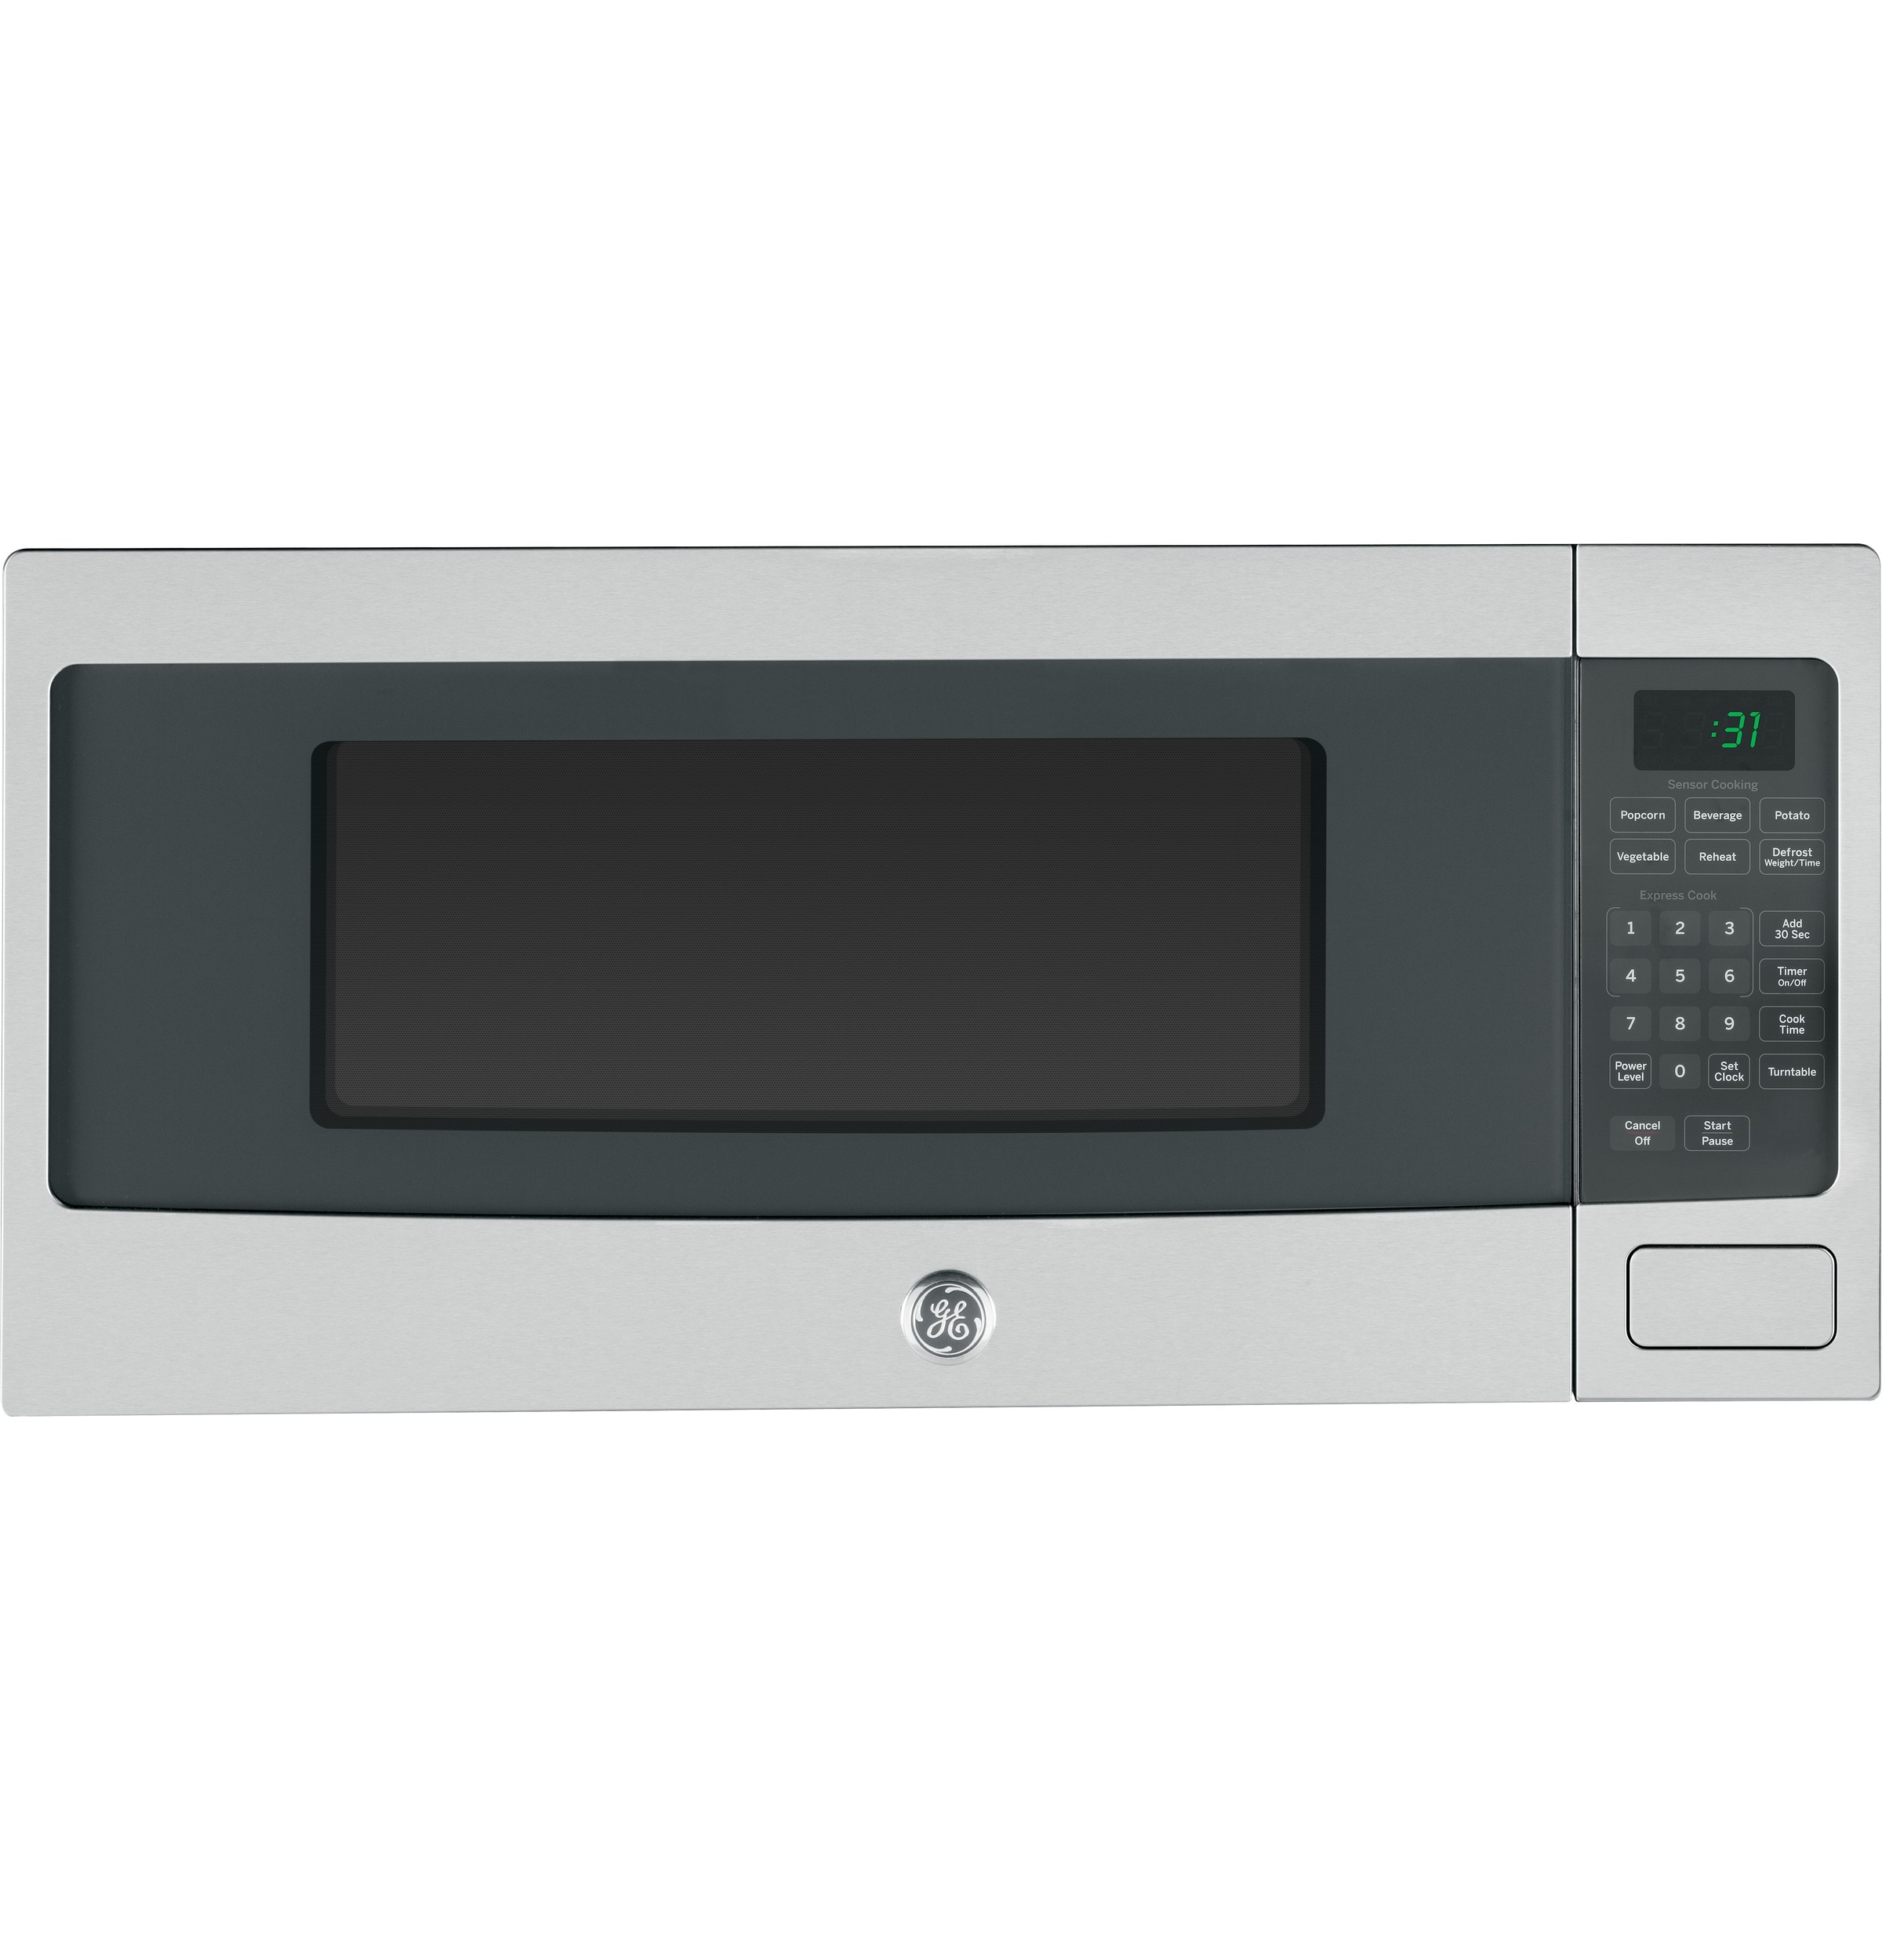 SMALLEST PROFILE Countertop Microwave - 5 star rating! We Love